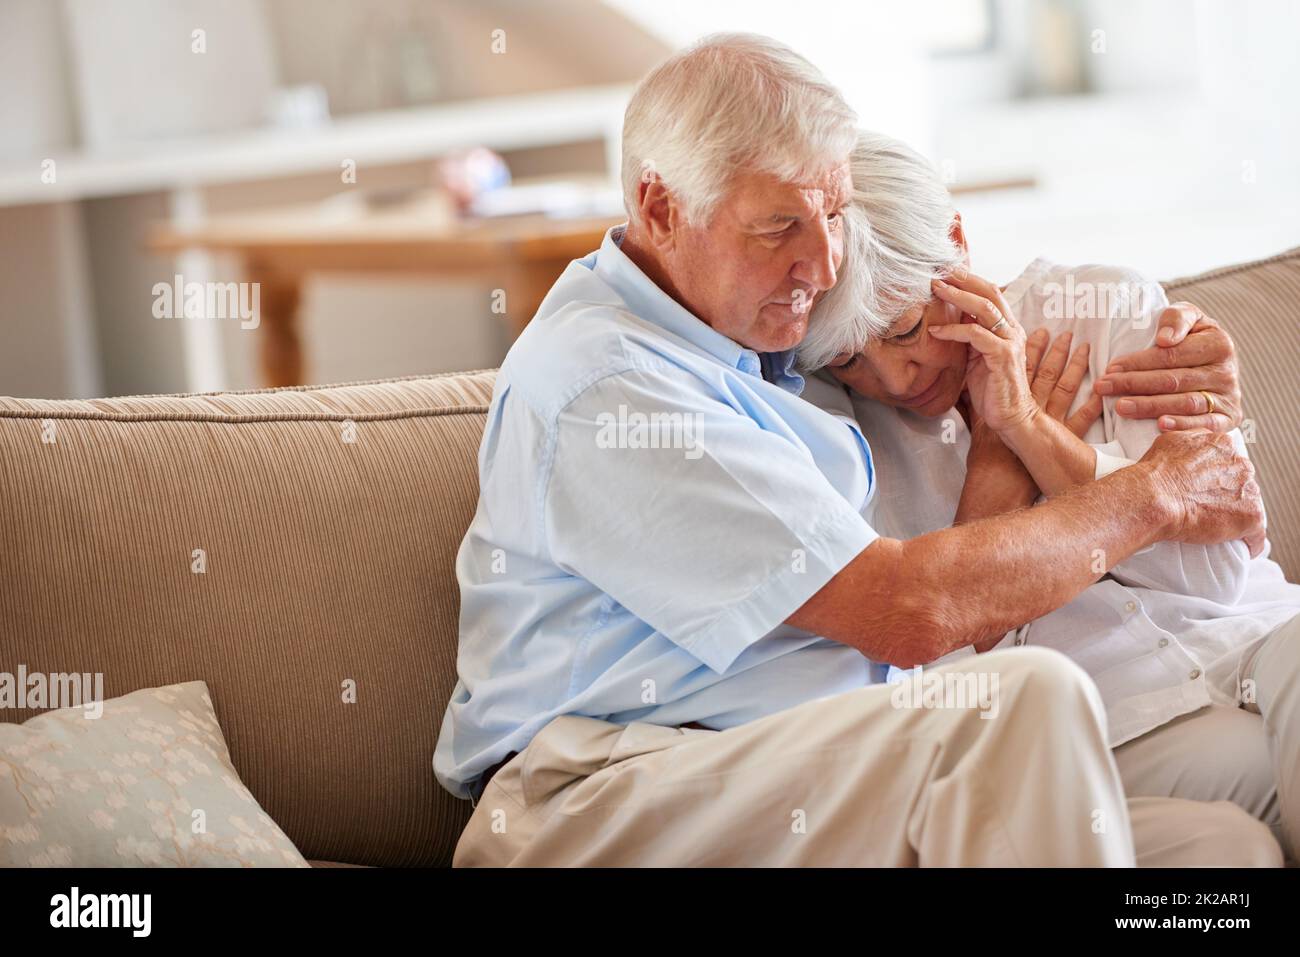 Im here for you darling. a senior man consoling his wife. Stock Photo